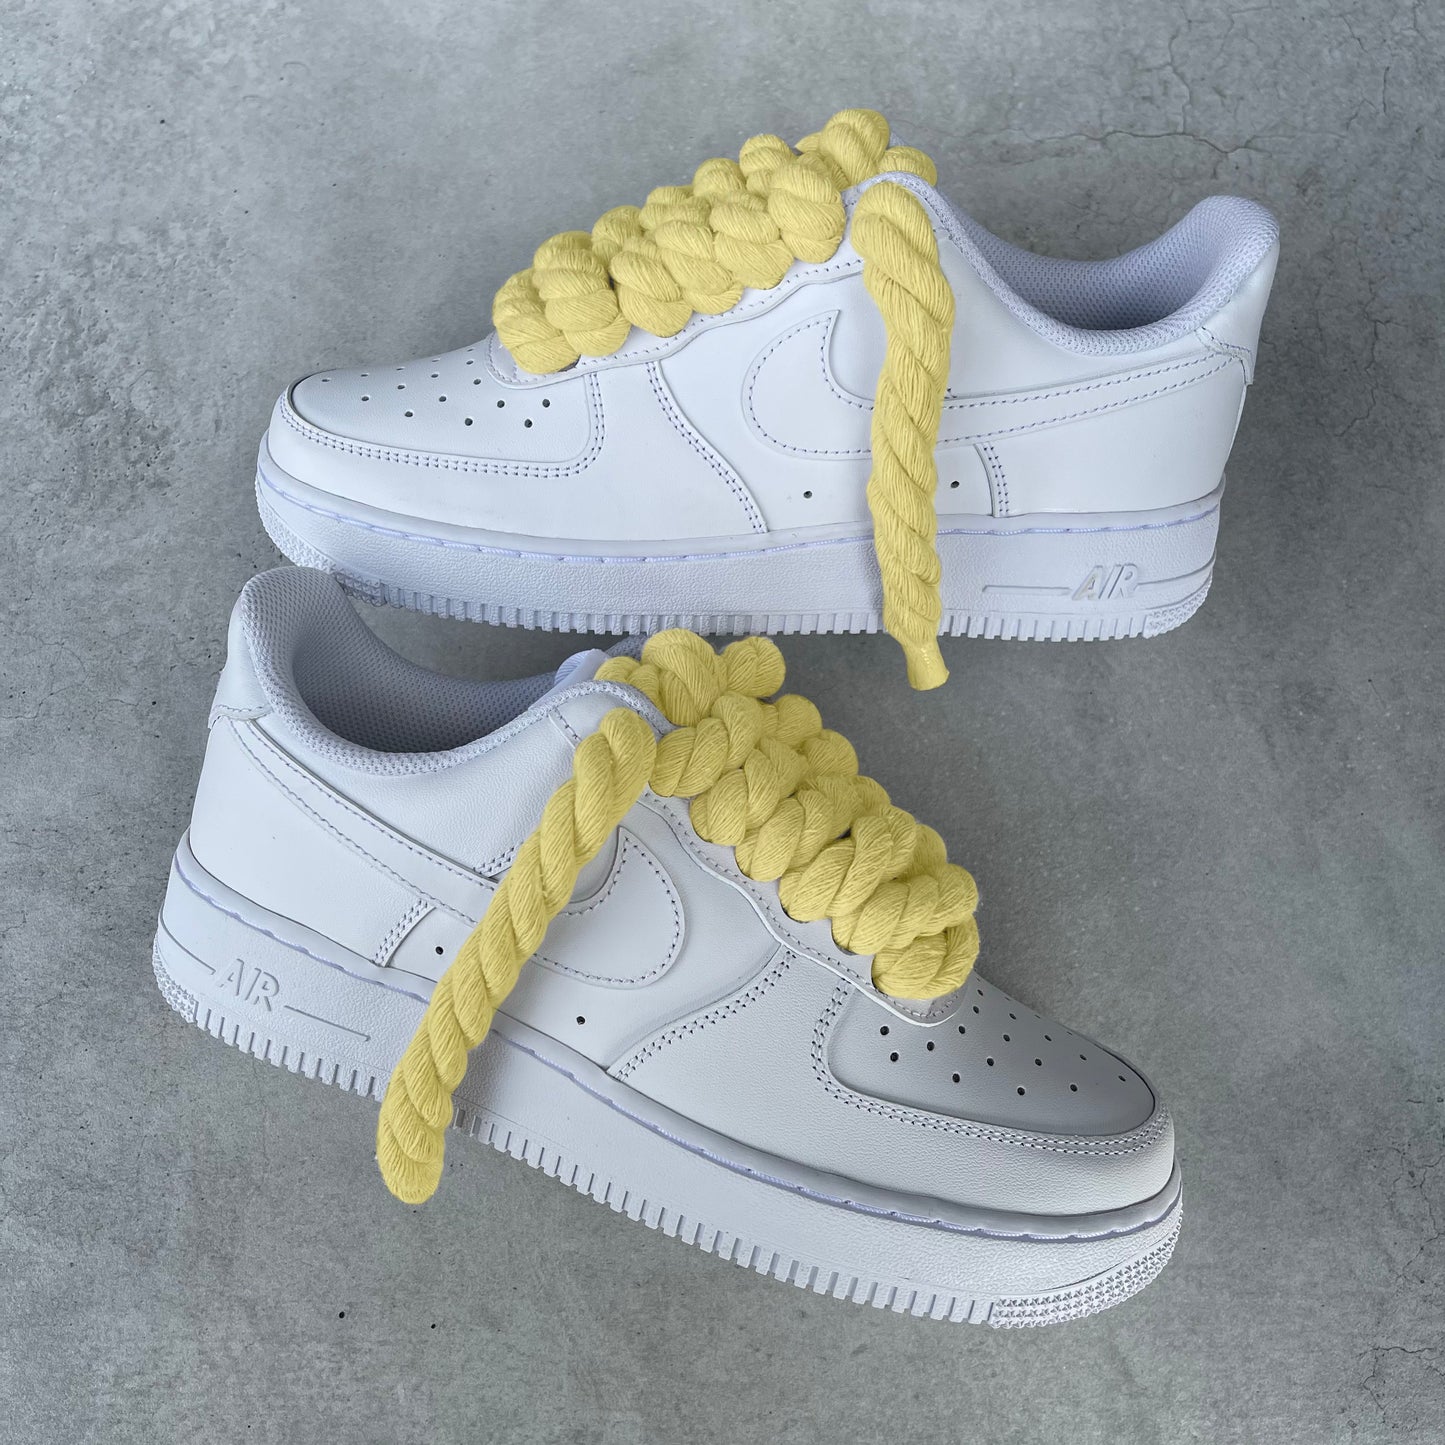 Custom AIR FORCE 1 - Rope laces (yellow)